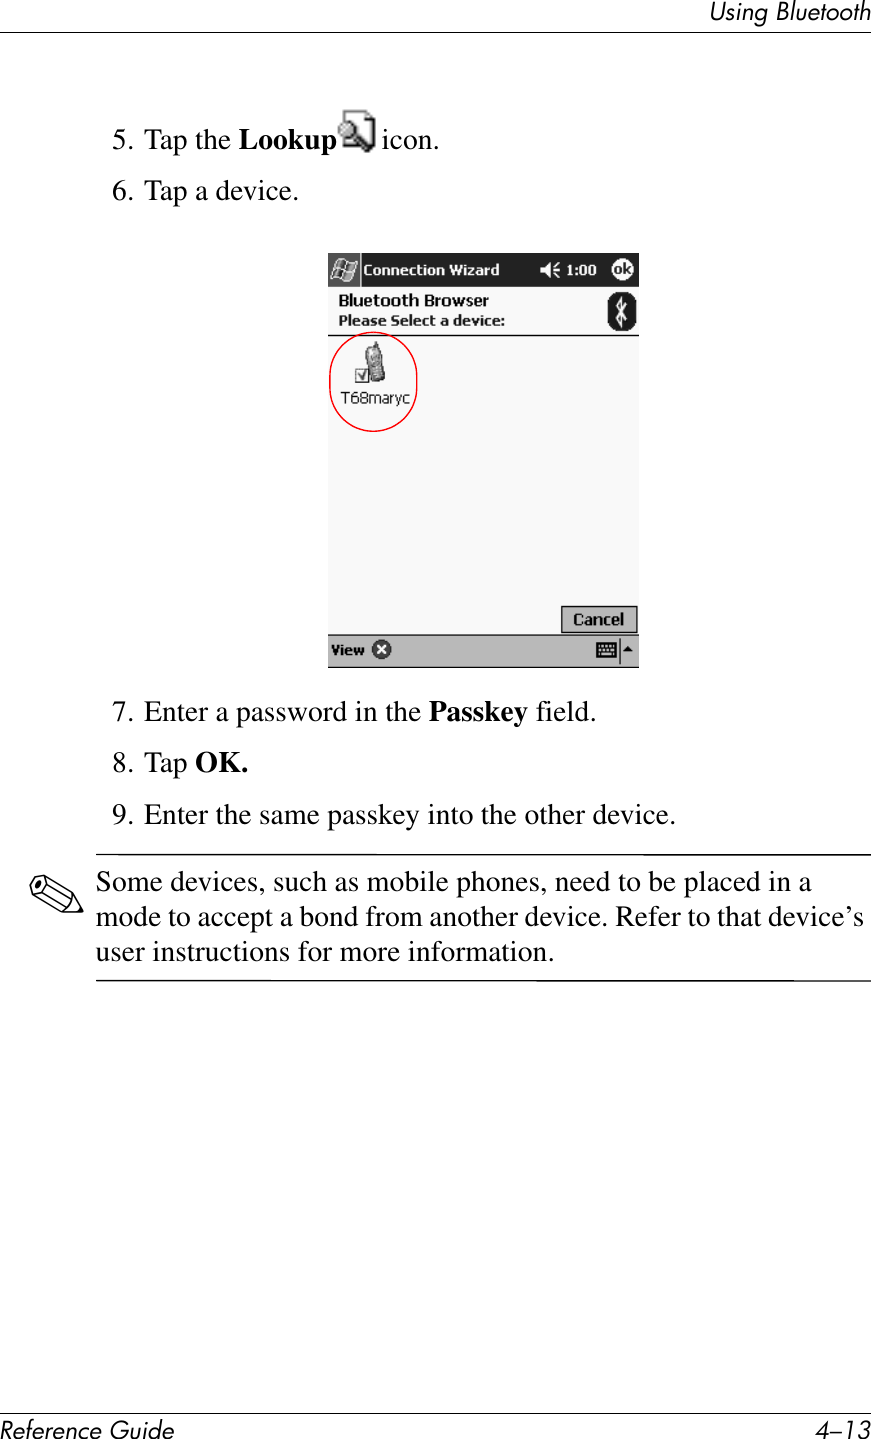 UL*%2&apos;PK)&quot;1771Q!&quot;#&quot;$&quot;%&amp;&quot;&apos;()*+&quot; C/.95. Tap the Lookup icon.6. Tap a device.7. Enter a password in the Passkey field.8. Tap OK.9. Enter the same passkey into the other device.✎Some devices, such as mobile phones, need to be placed in a mode to accept a bond from another device. Refer to that device’s user instructions for more information.